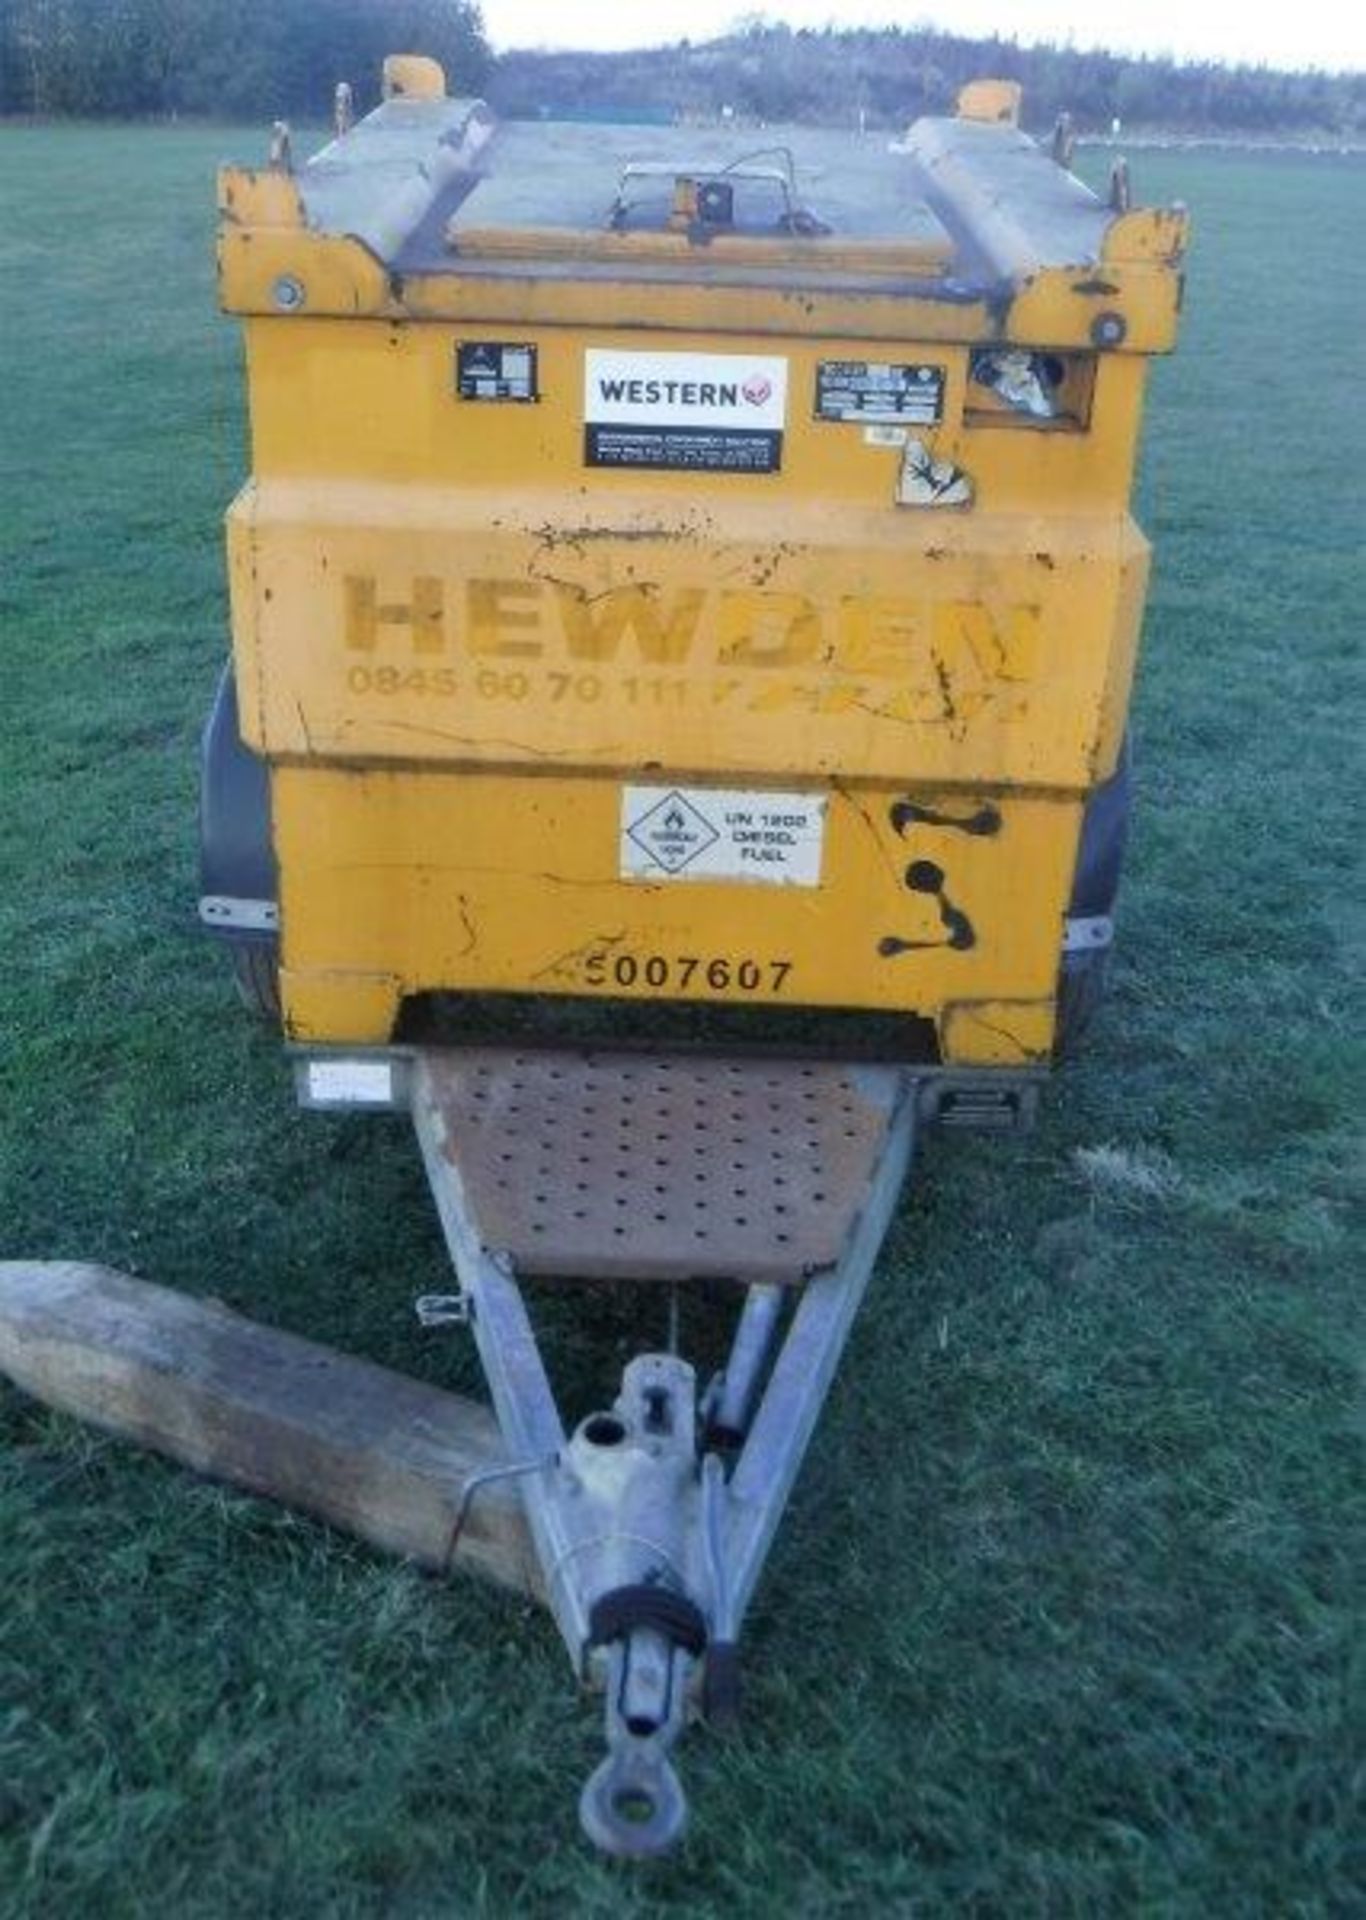 2008 WESTERN fastow 950ltr trans cube fuel bowser S/N 070505413997 (5007607) - Image 6 of 20